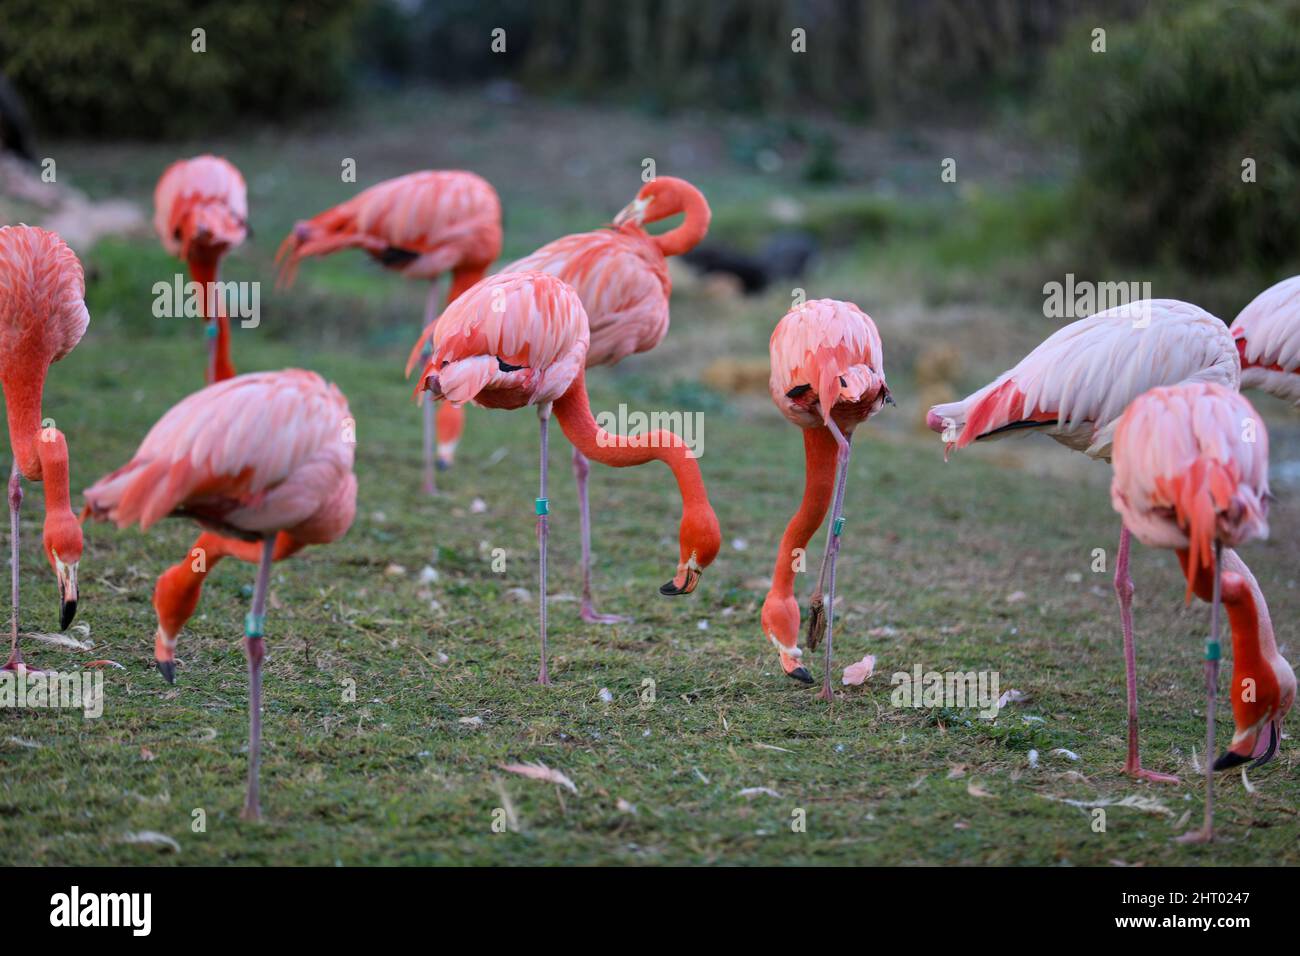 Pink Adult Flamingo on a Grass Ground Stock Photo